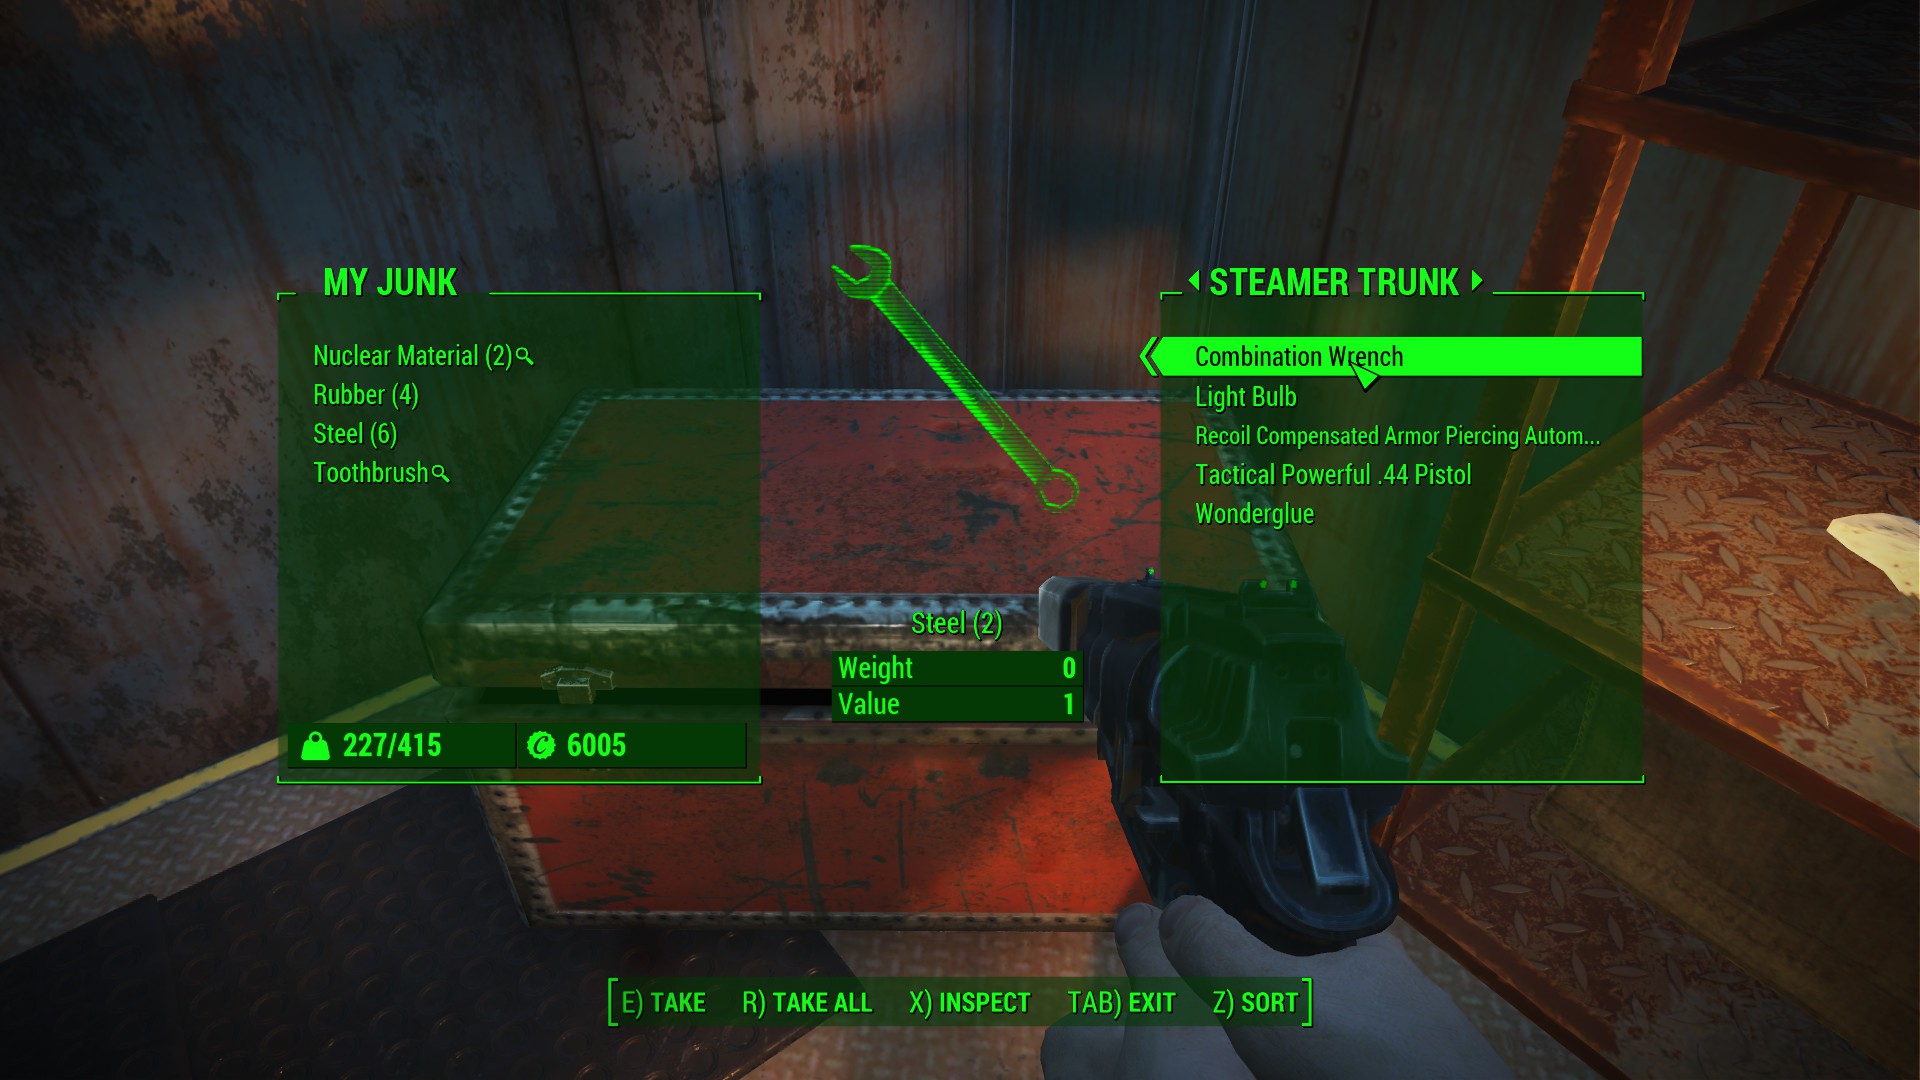 Weightless junk and other items fallout 4 фото 1